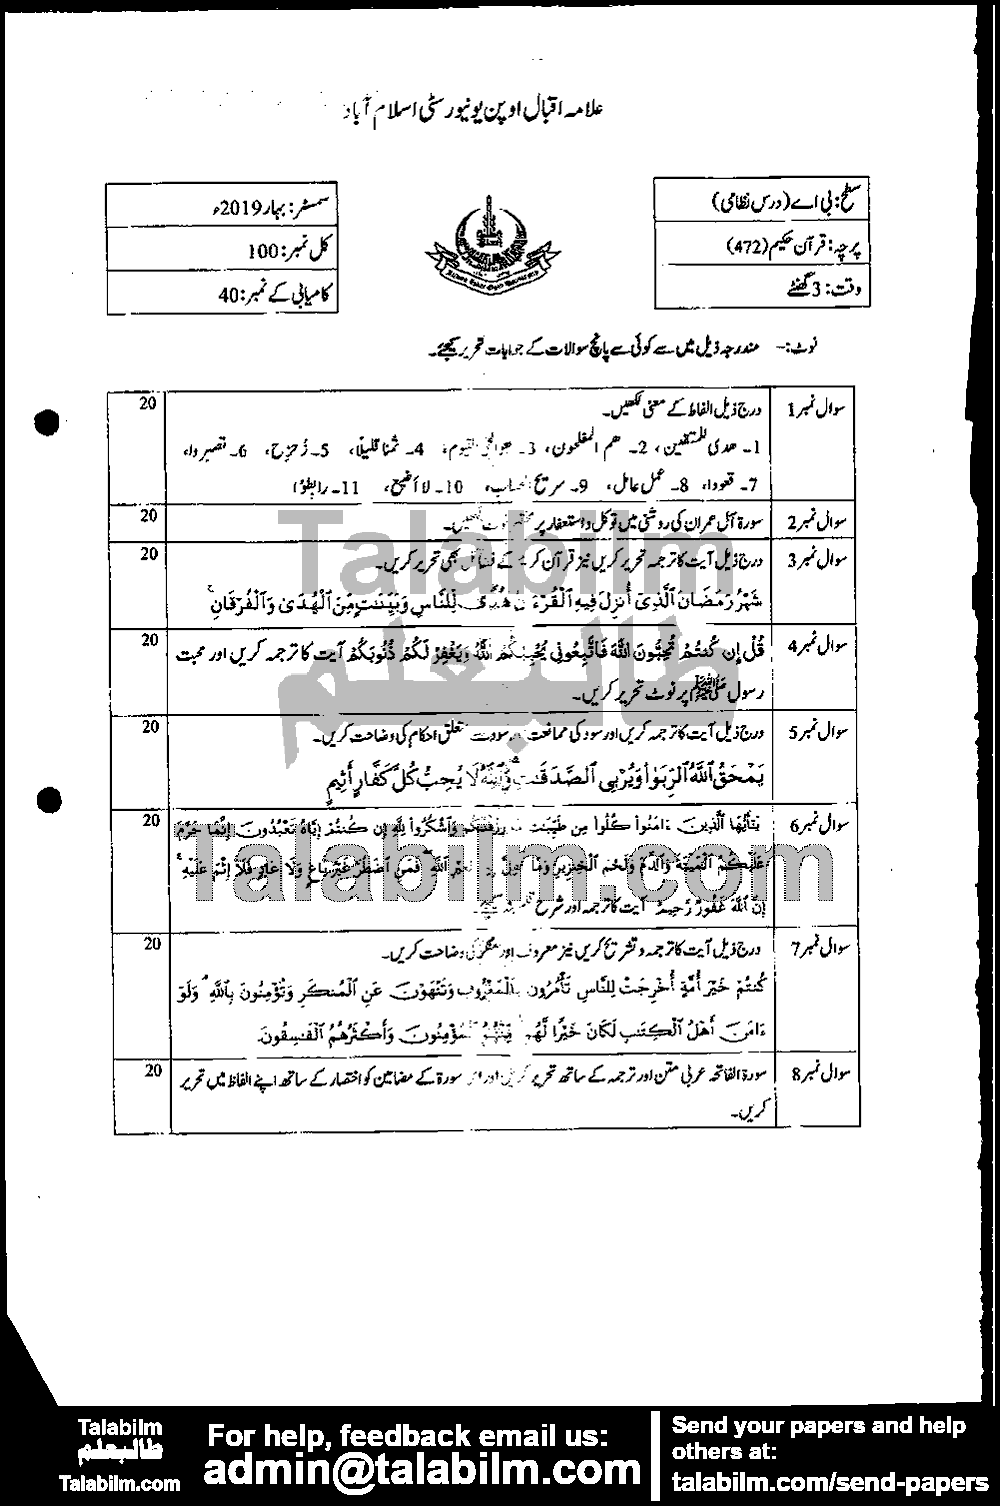 Quran-e-Hakim 472 past paper for Spring 2019